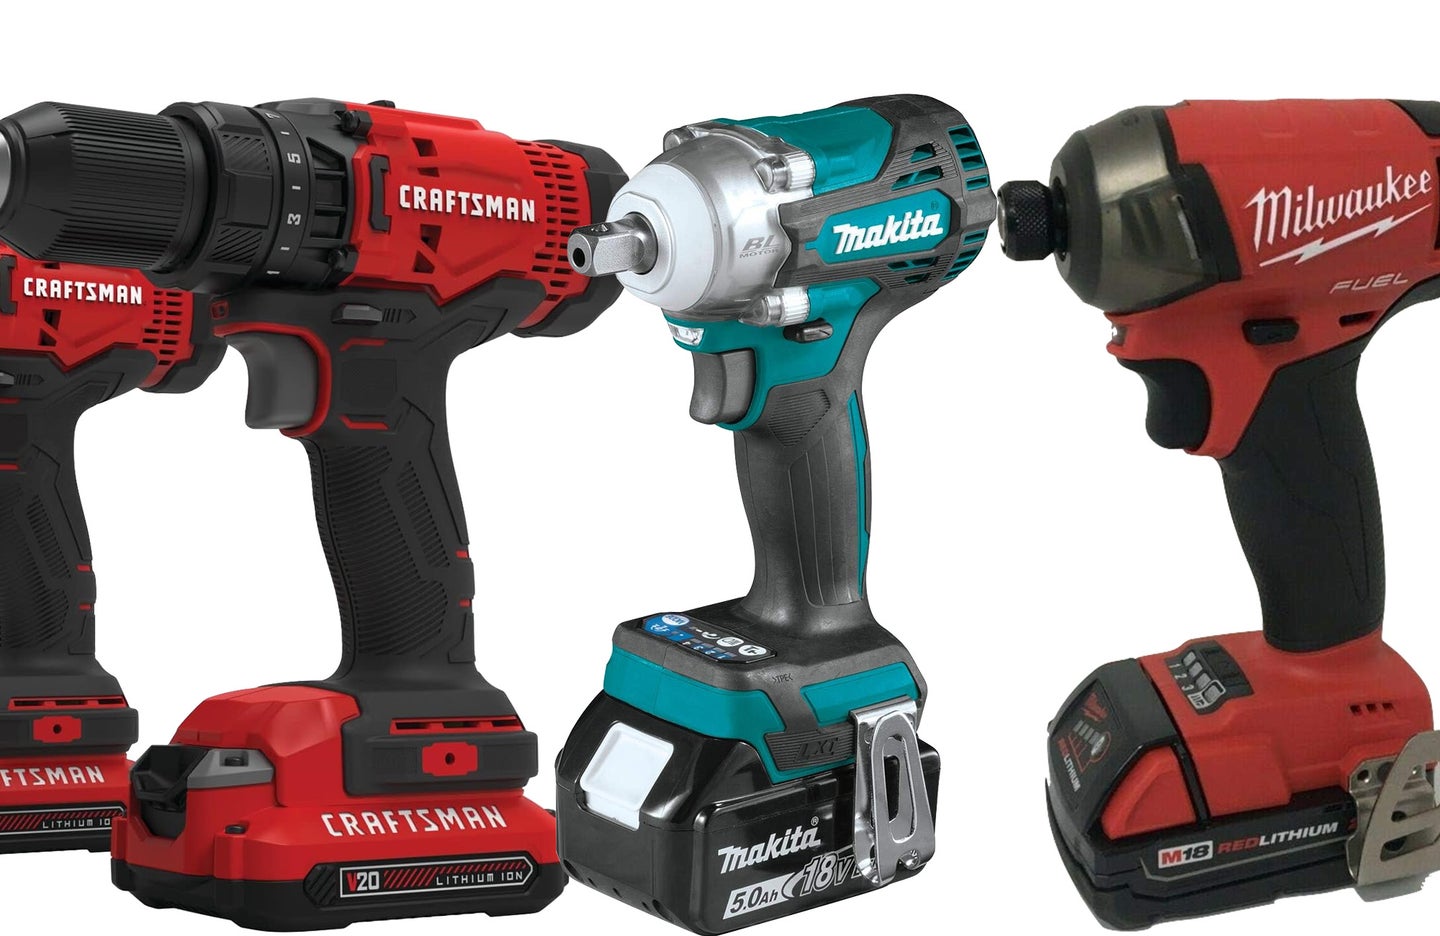 Complete your tool set with one of the best impact drivers.